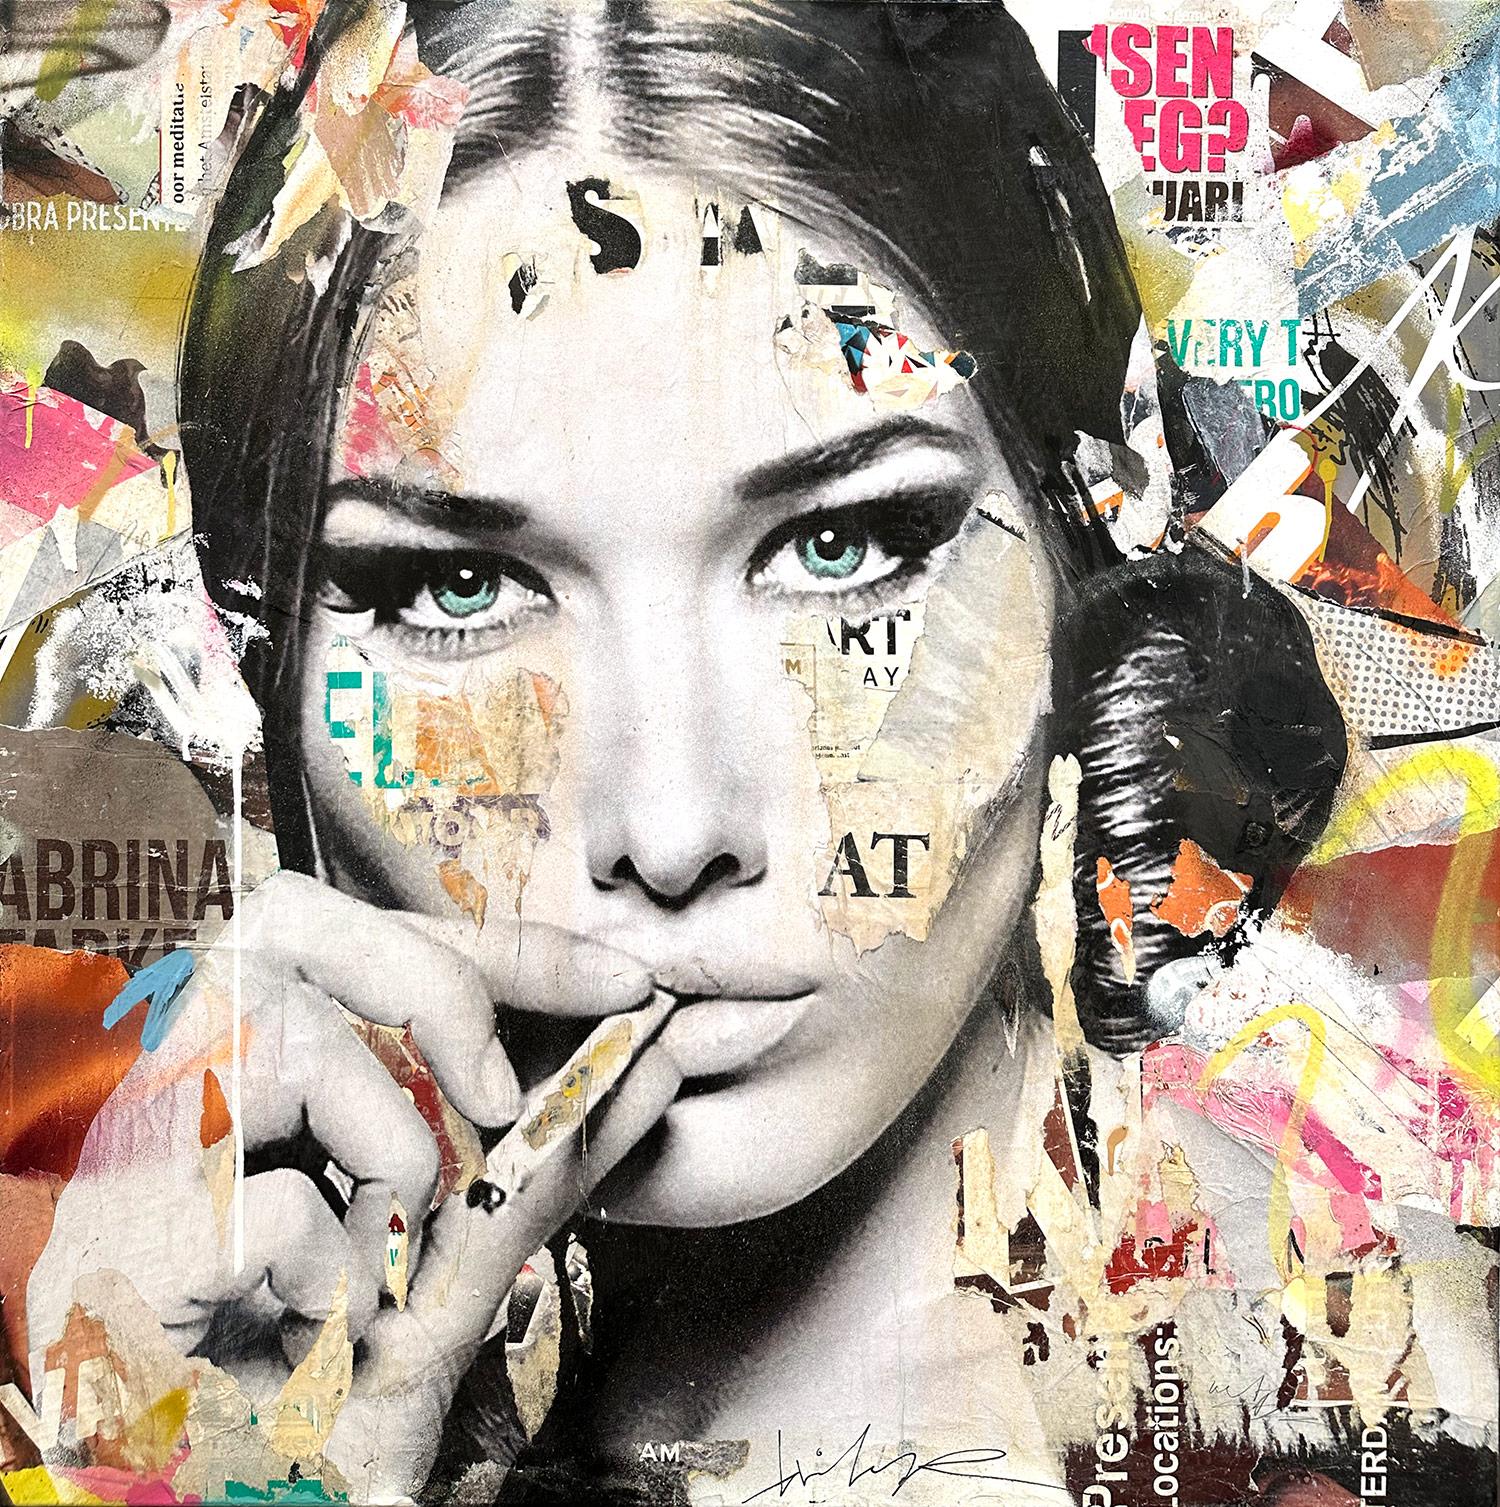 Gieler Abstract Painting - "Carla Is Smokin' Hot" Carla Bruni Colorful Pop Art Portrait Painting on Canvas